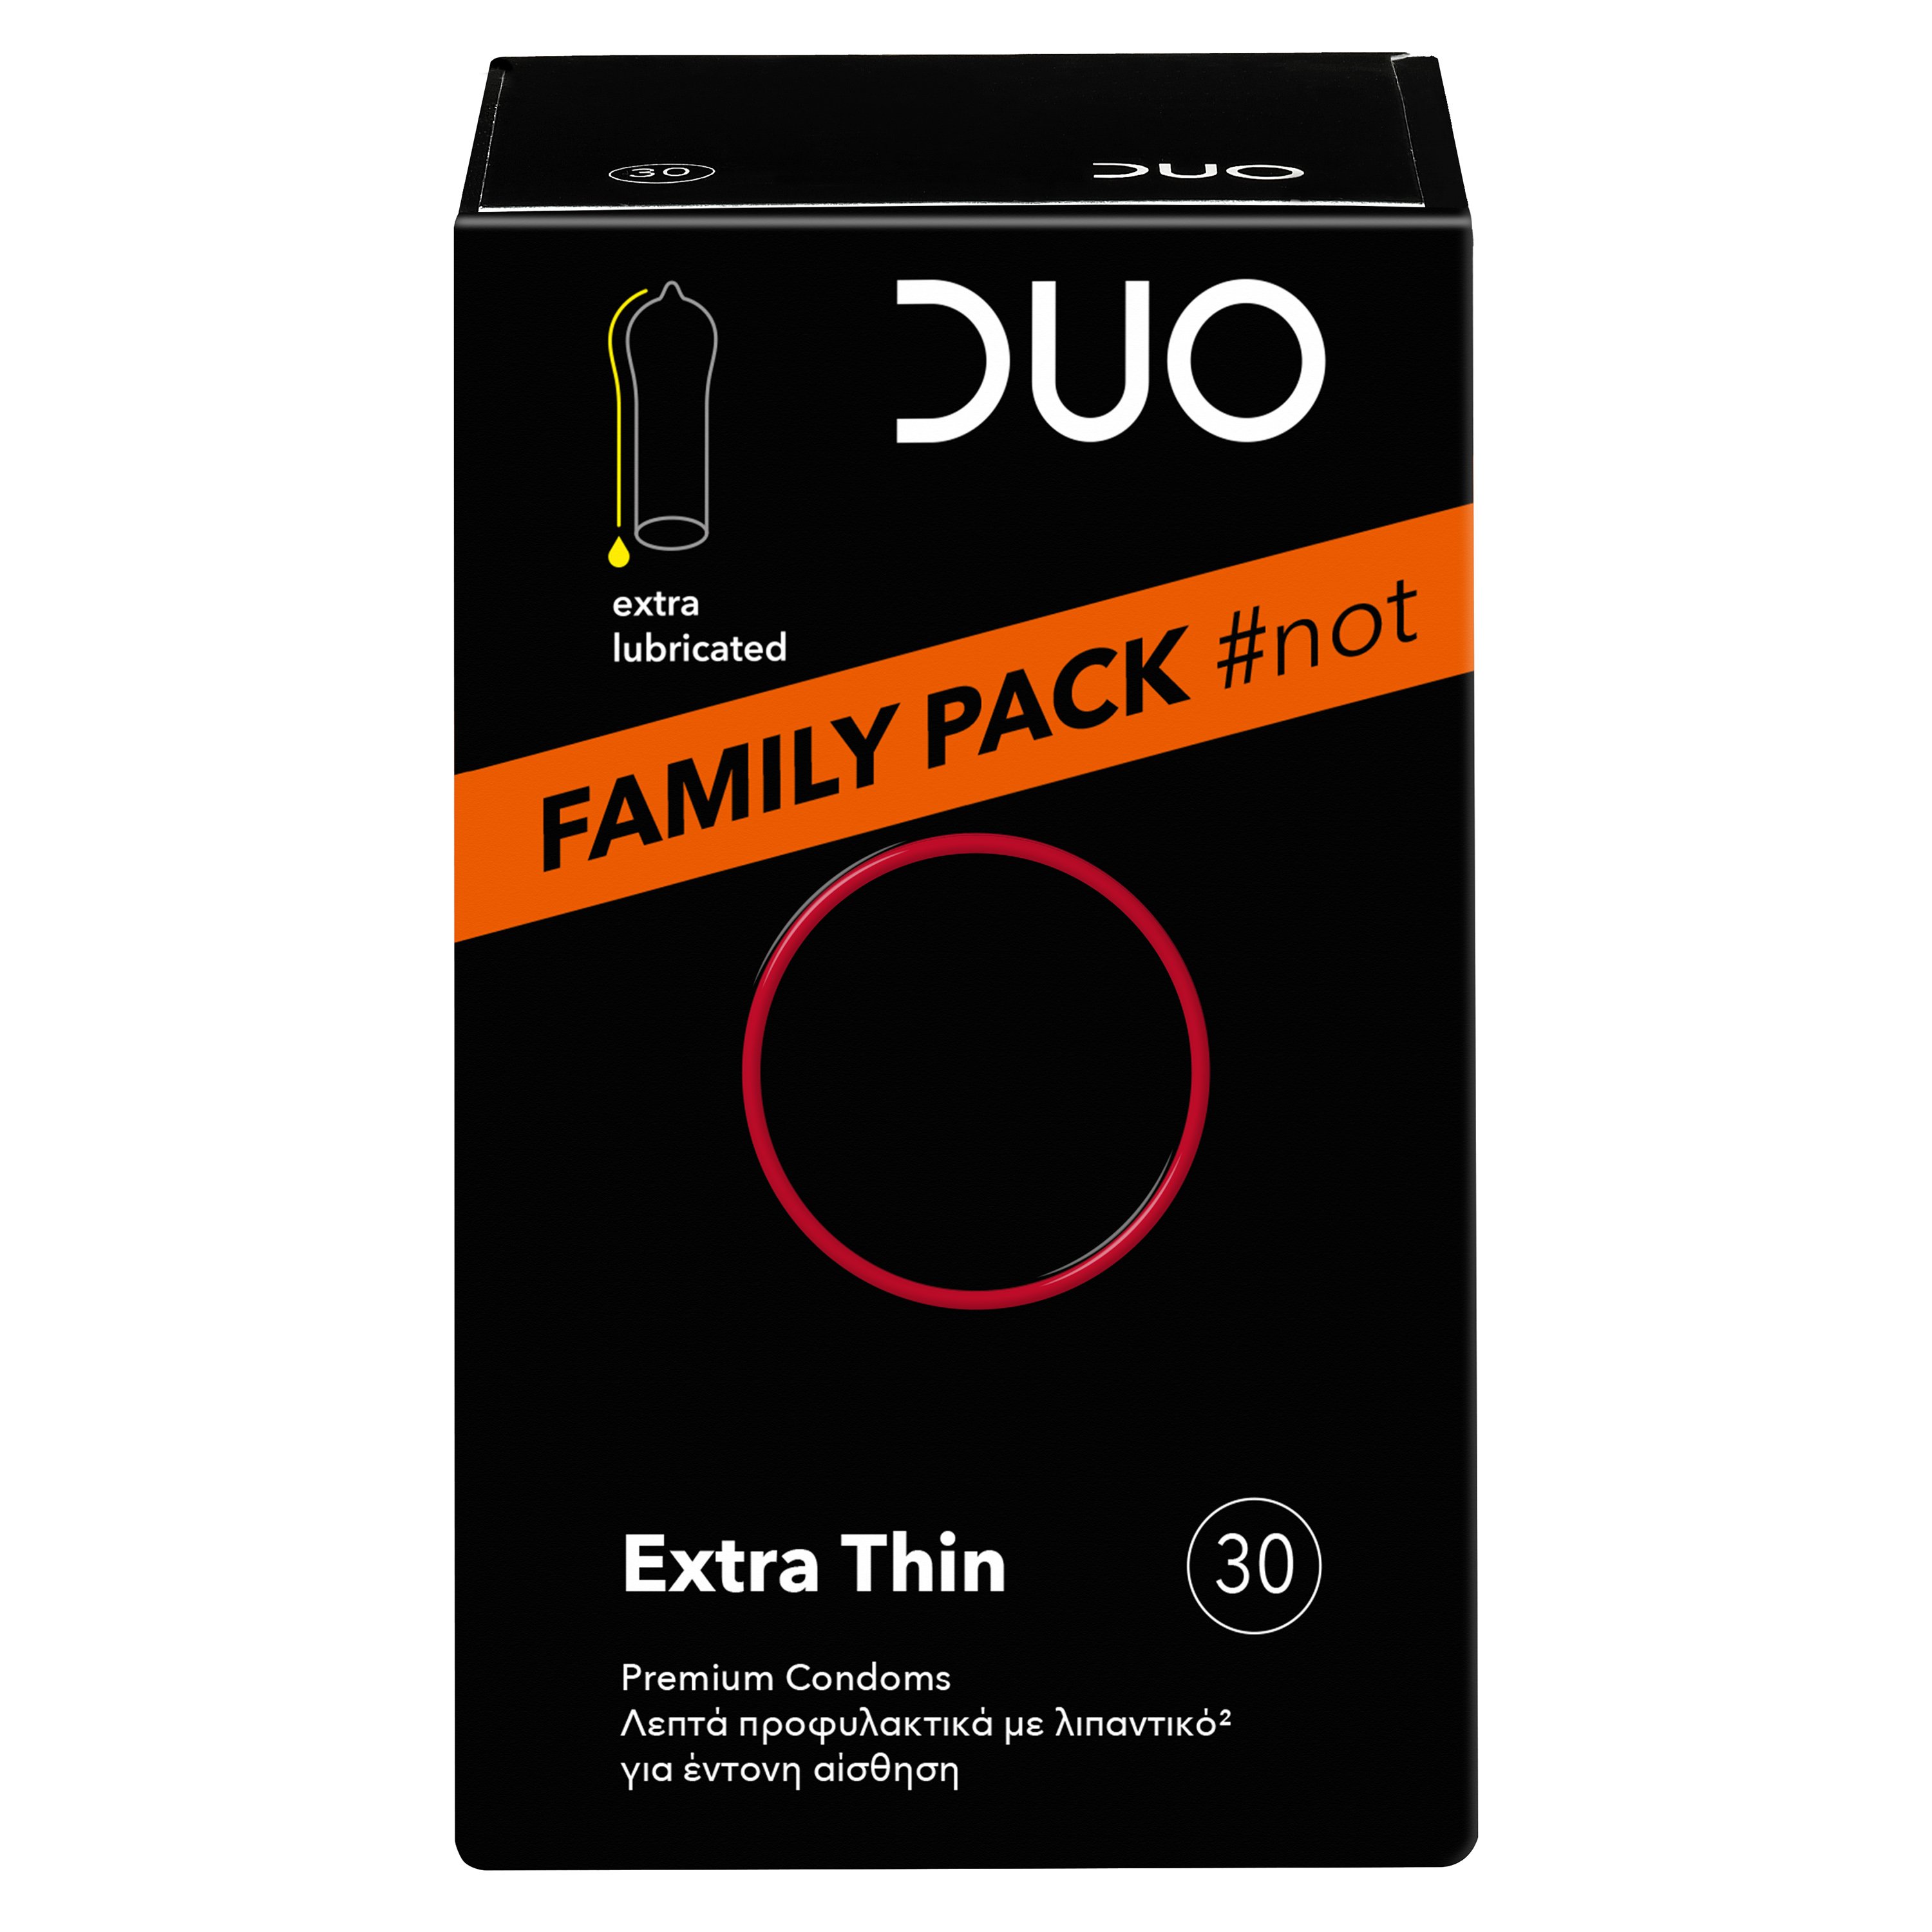 Duo Premium Extra Thin Family Pack Πολύ Λεπτά Προφυλακτικά 30 Τεμάχια